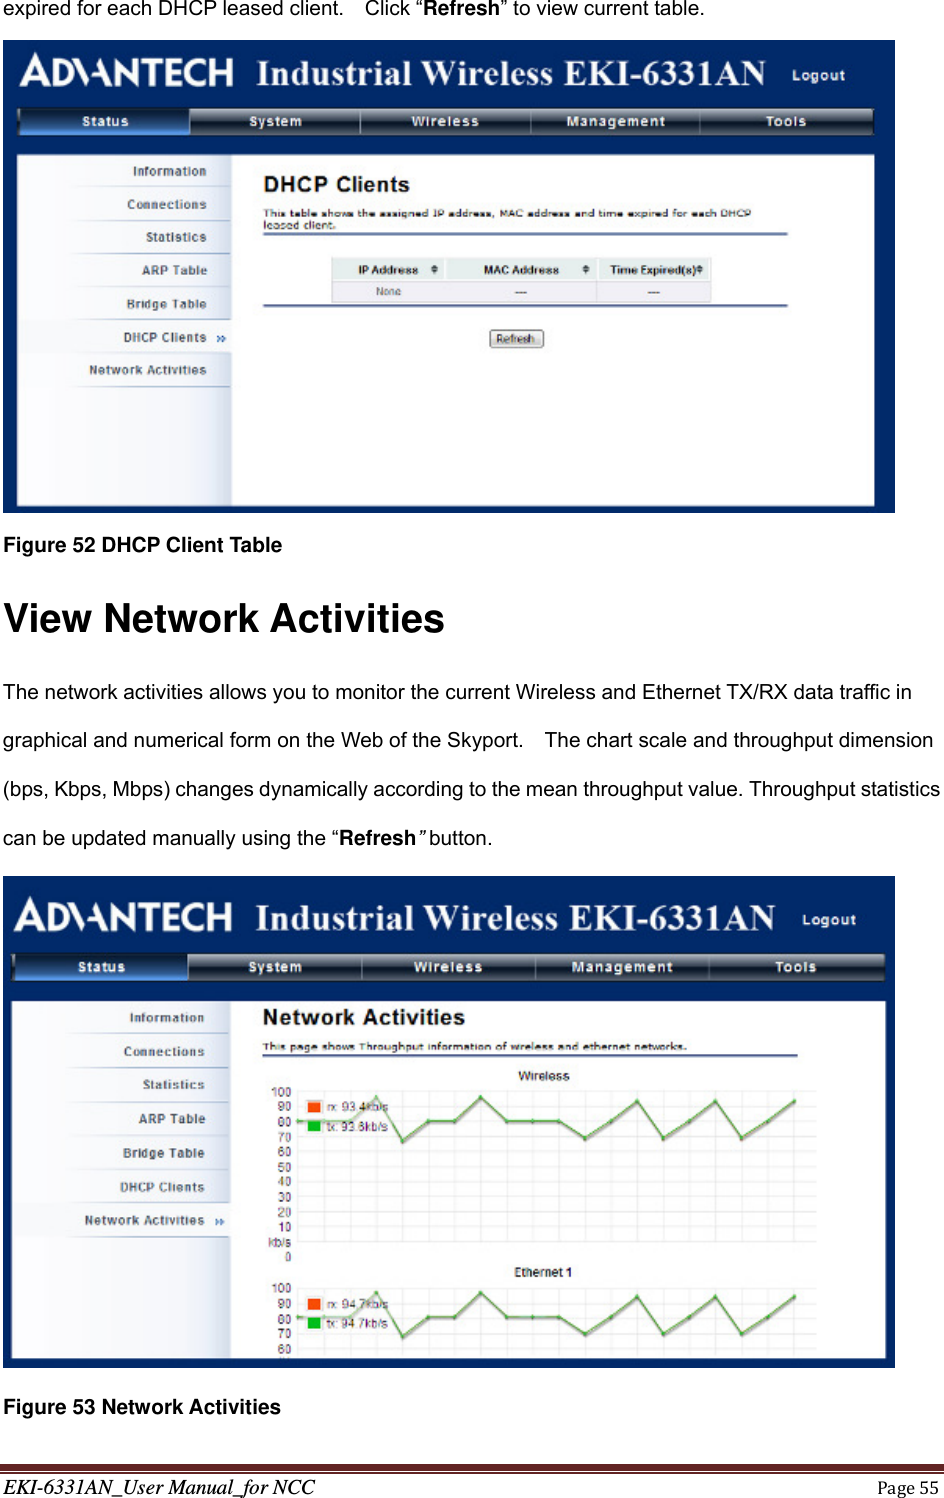 EKI-6331AN_User Manual_for NCCPage55expired for each DHCP leased client.    Click “Refresh” to view current table.  Figure 52 DHCP Client Table View Network Activities The network activities allows you to monitor the current Wireless and Ethernet TX/RX data traffic in graphical and numerical form on the Web of the Skyport.    The chart scale and throughput dimension (bps, Kbps, Mbps) changes dynamically according to the mean throughput value. Throughput statistics can be updated manually using the “Refresh” button.  Figure 53 Network Activities 